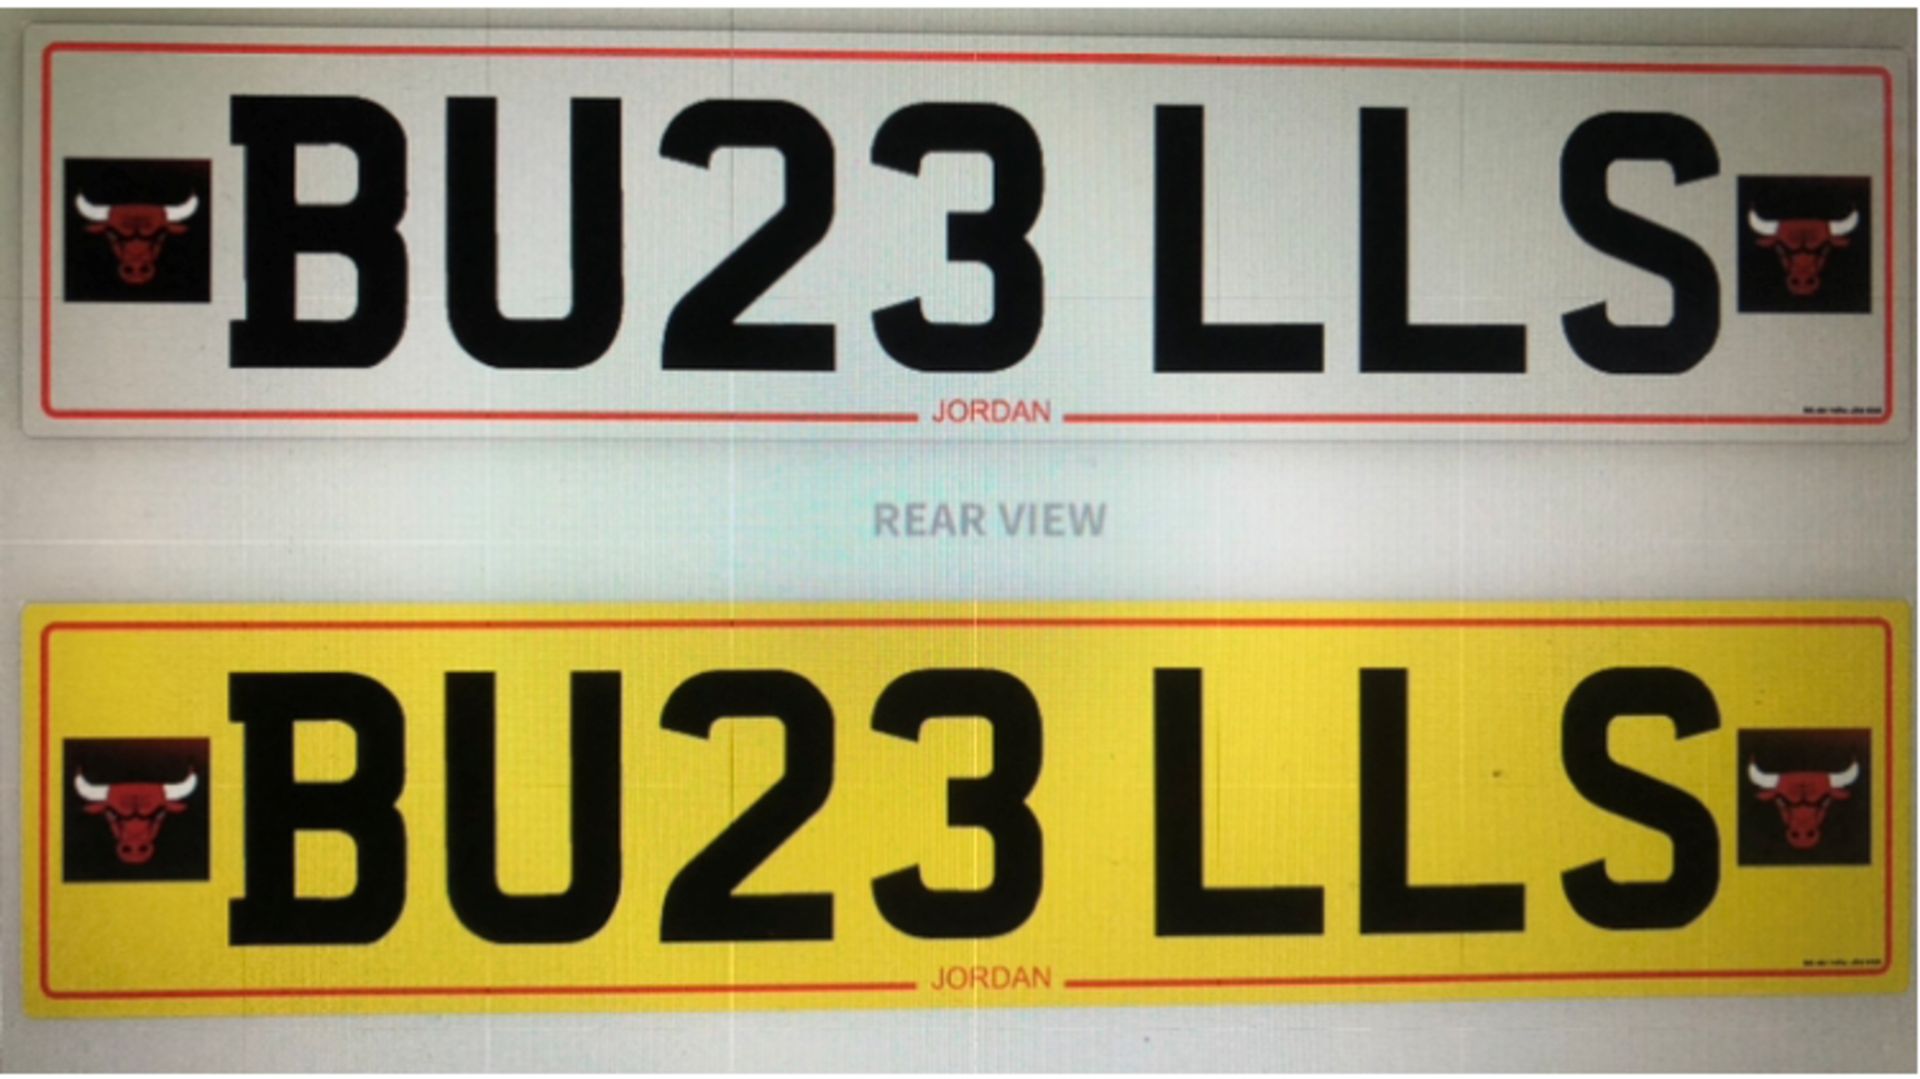 *BU23 LLS* Cherished Private Registration Number Plate Held On Retention Certificate - Image 2 of 2